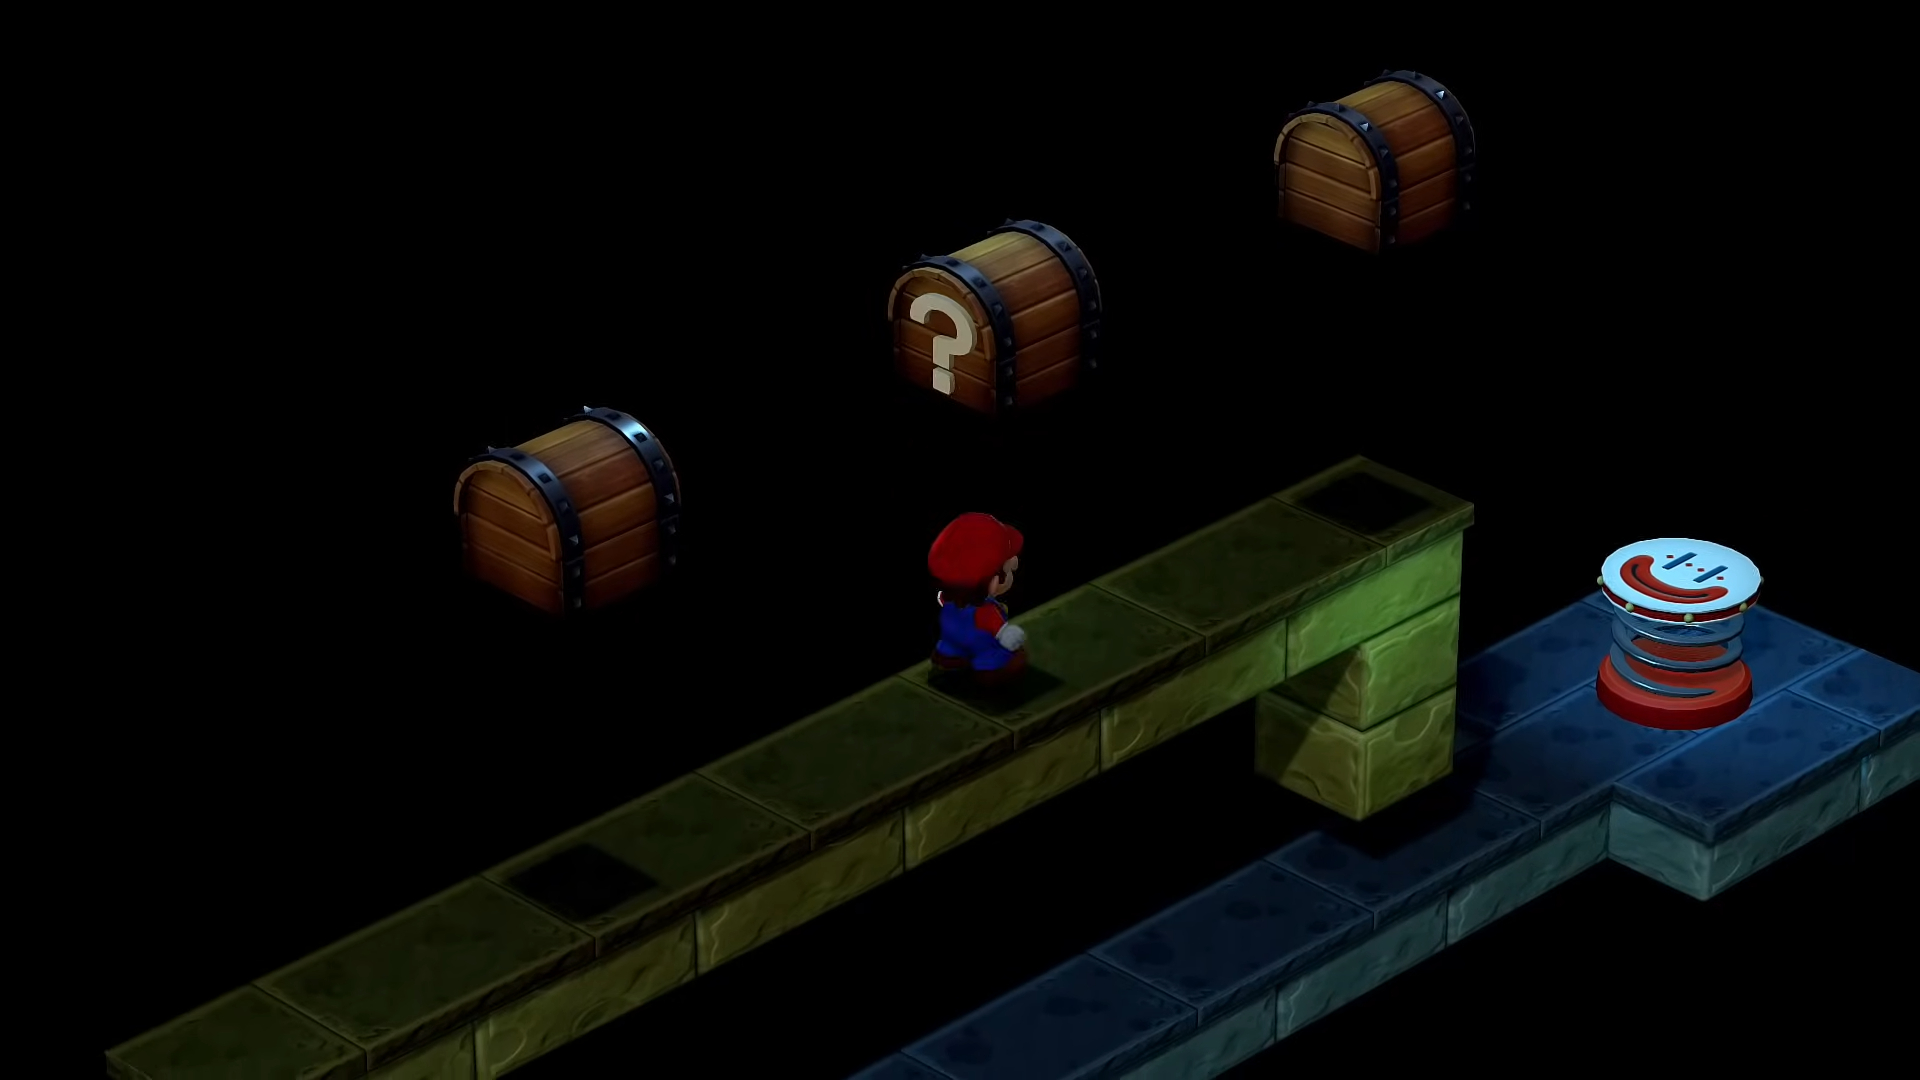 Mario in a sewer.